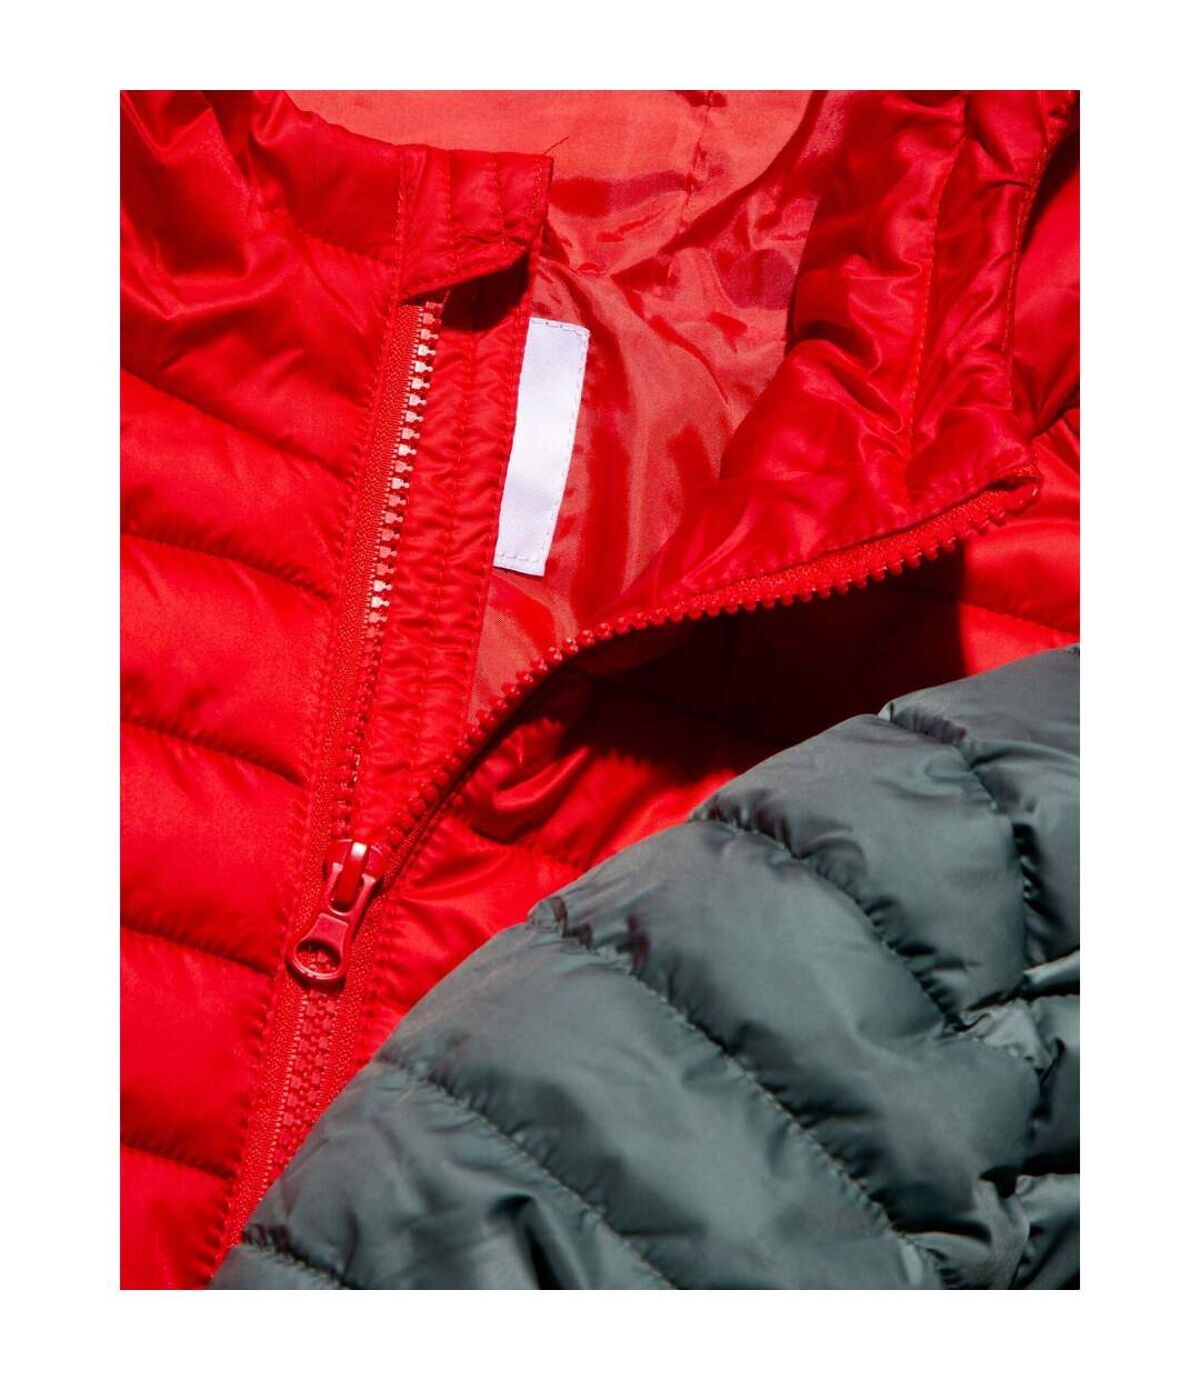 Hype Mens Puffer Jacket (Red)